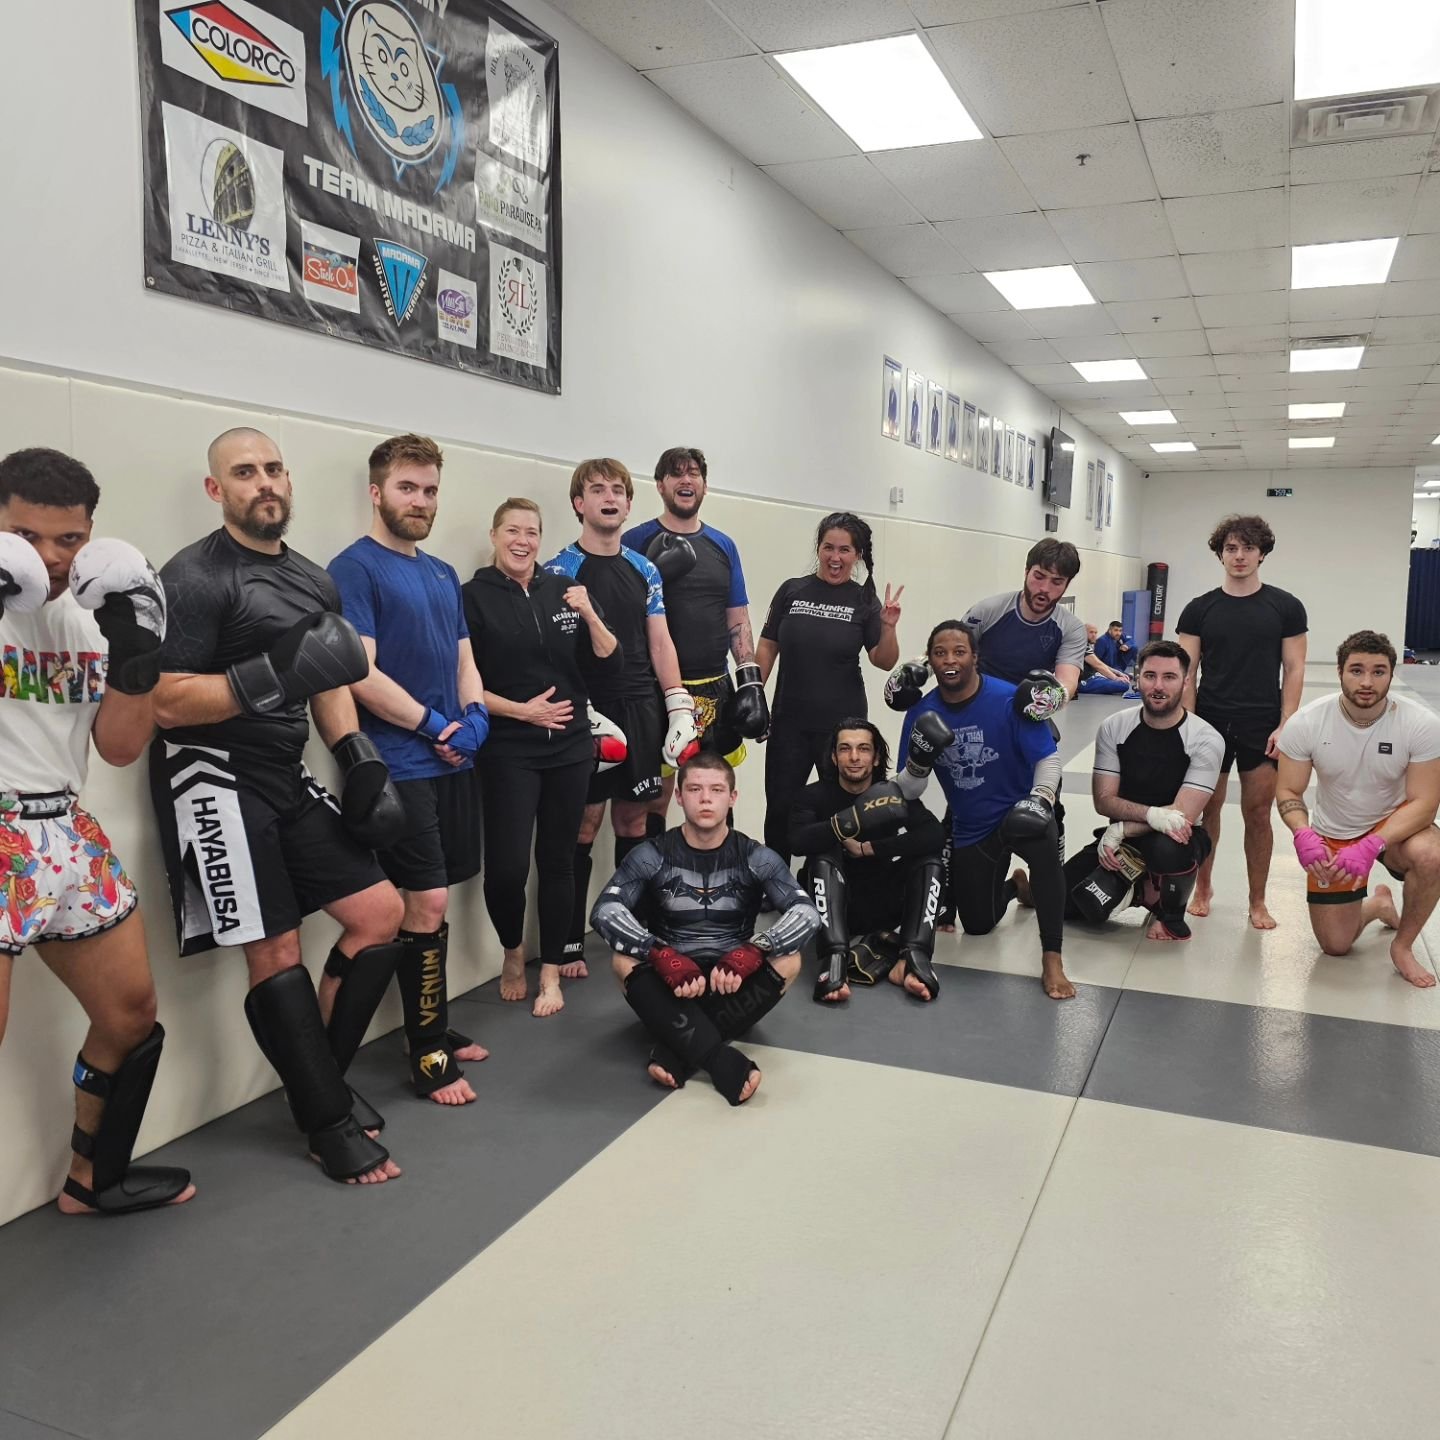 Another great Monday night of kickboxing. This team just keeps getting better each week 🥊🥊Keep up the good work! #bestteam #kickboxing #boxing #team #teamwork